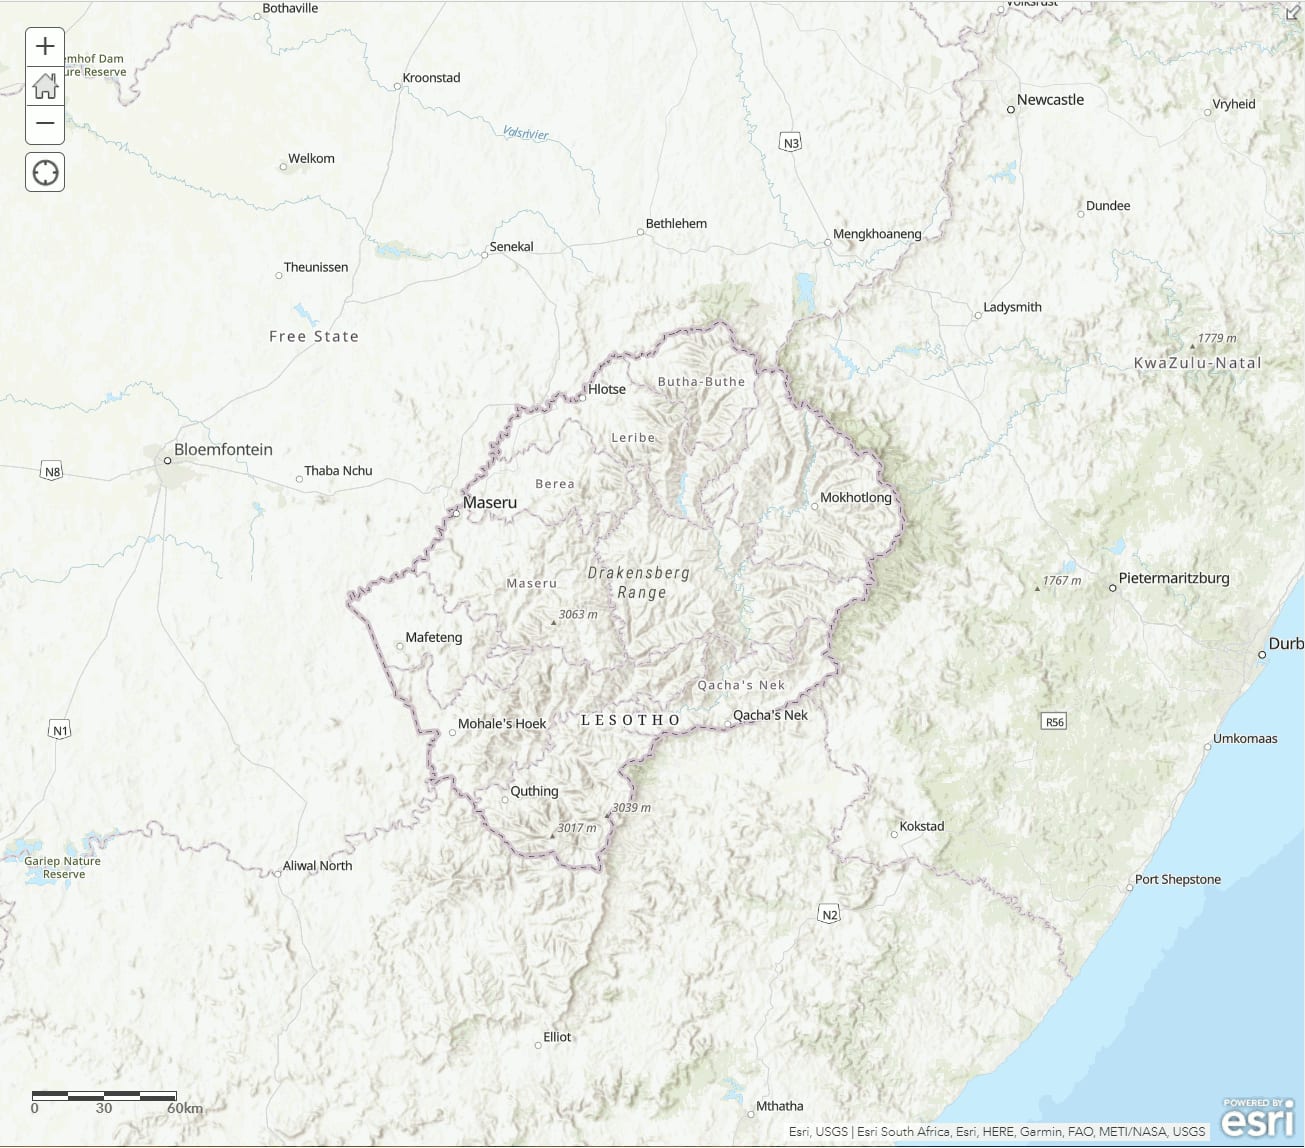 Why is the whole country of Lesotho clearly distinguishable from space?